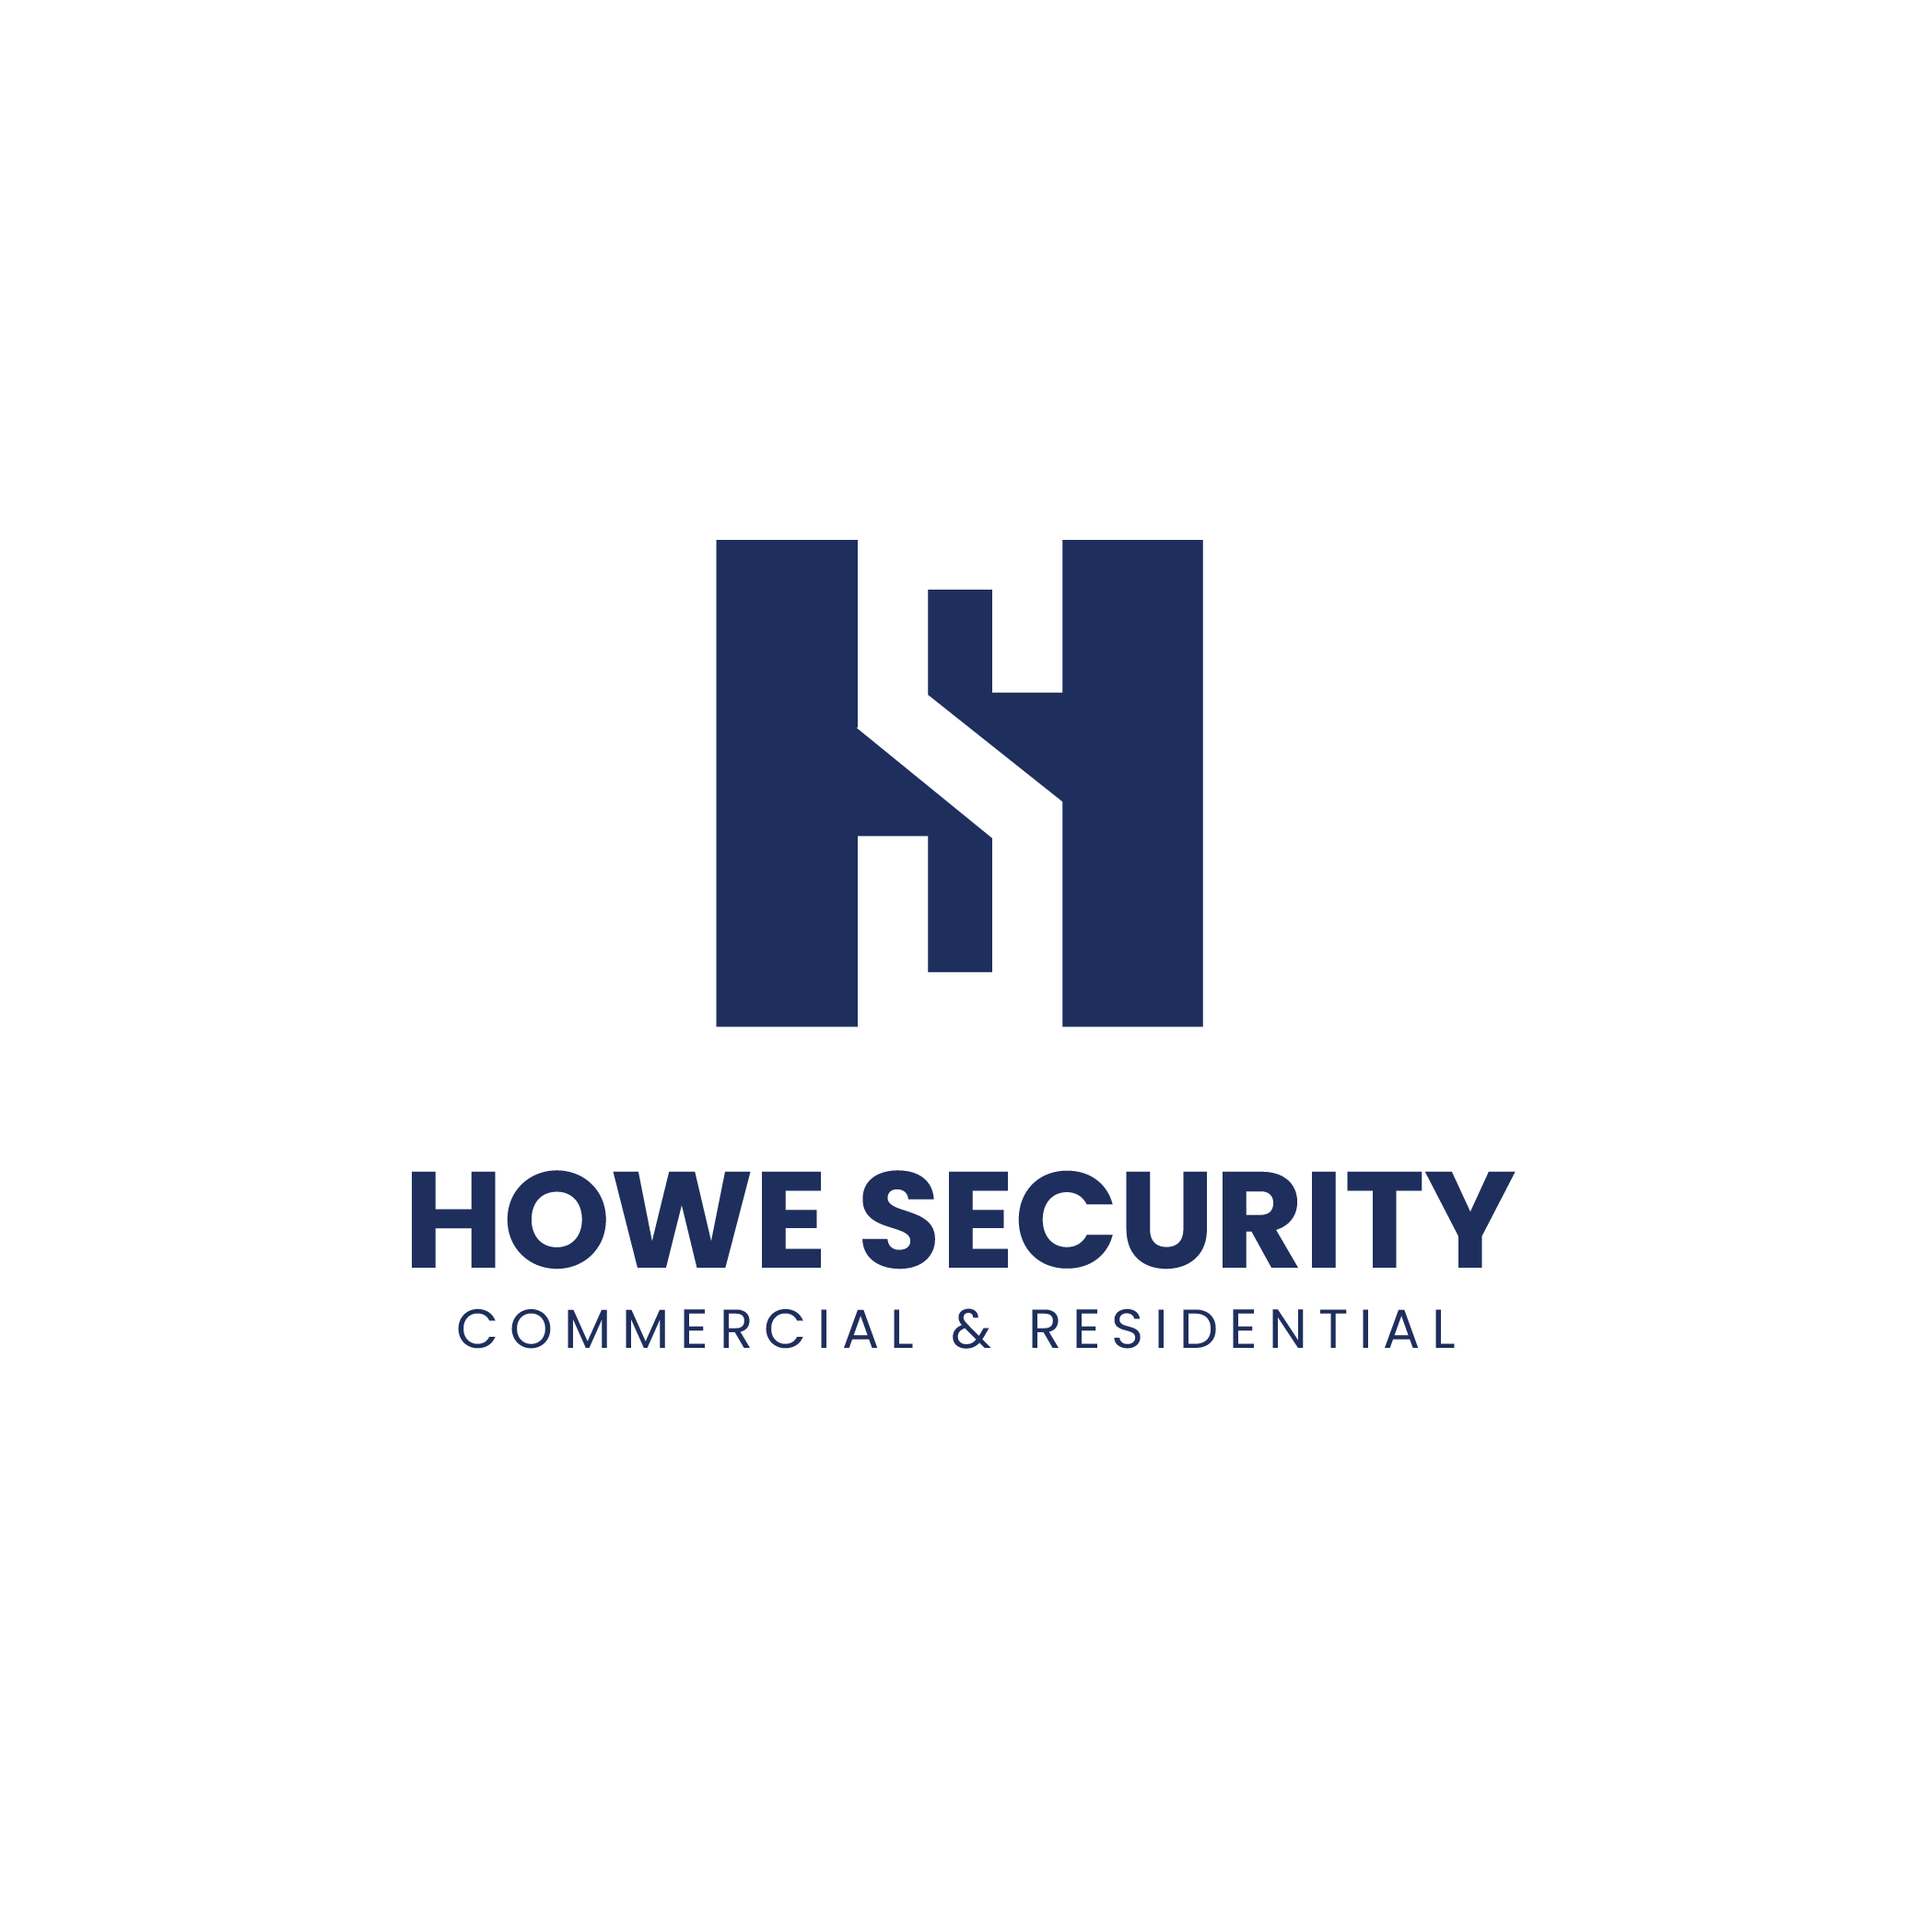 Howe Security Logo Stacked in Security Blue